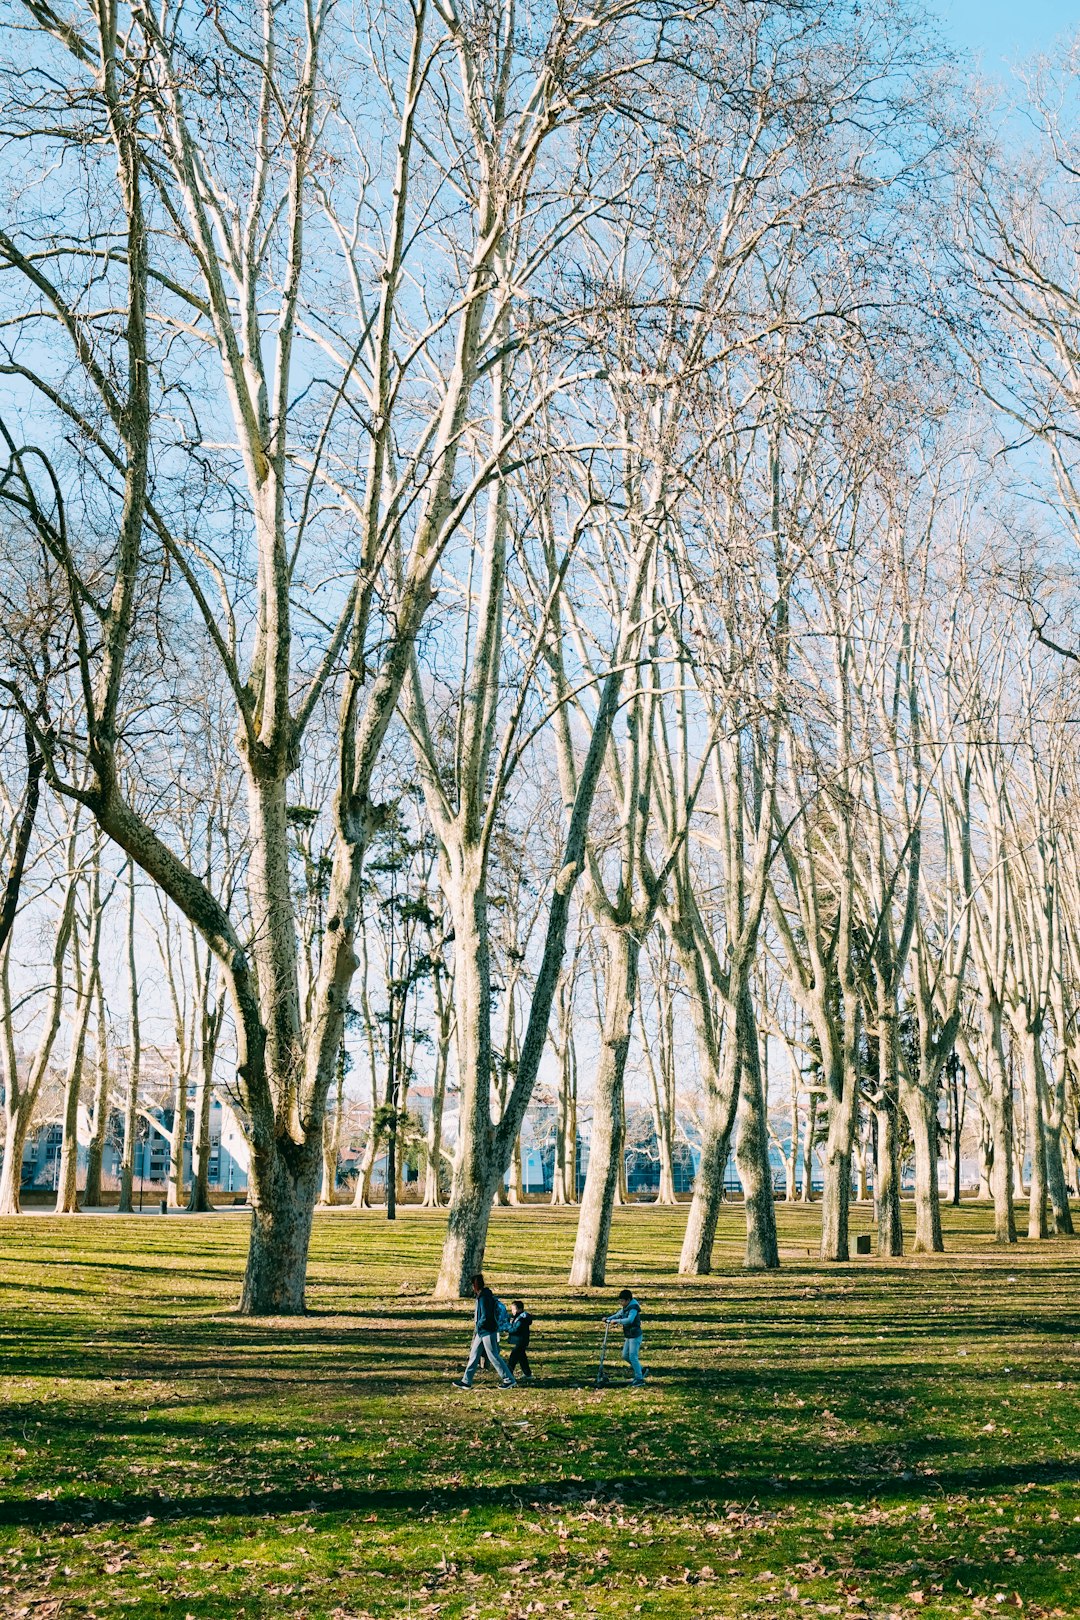 three persons playing on ground near bare trees during daytime